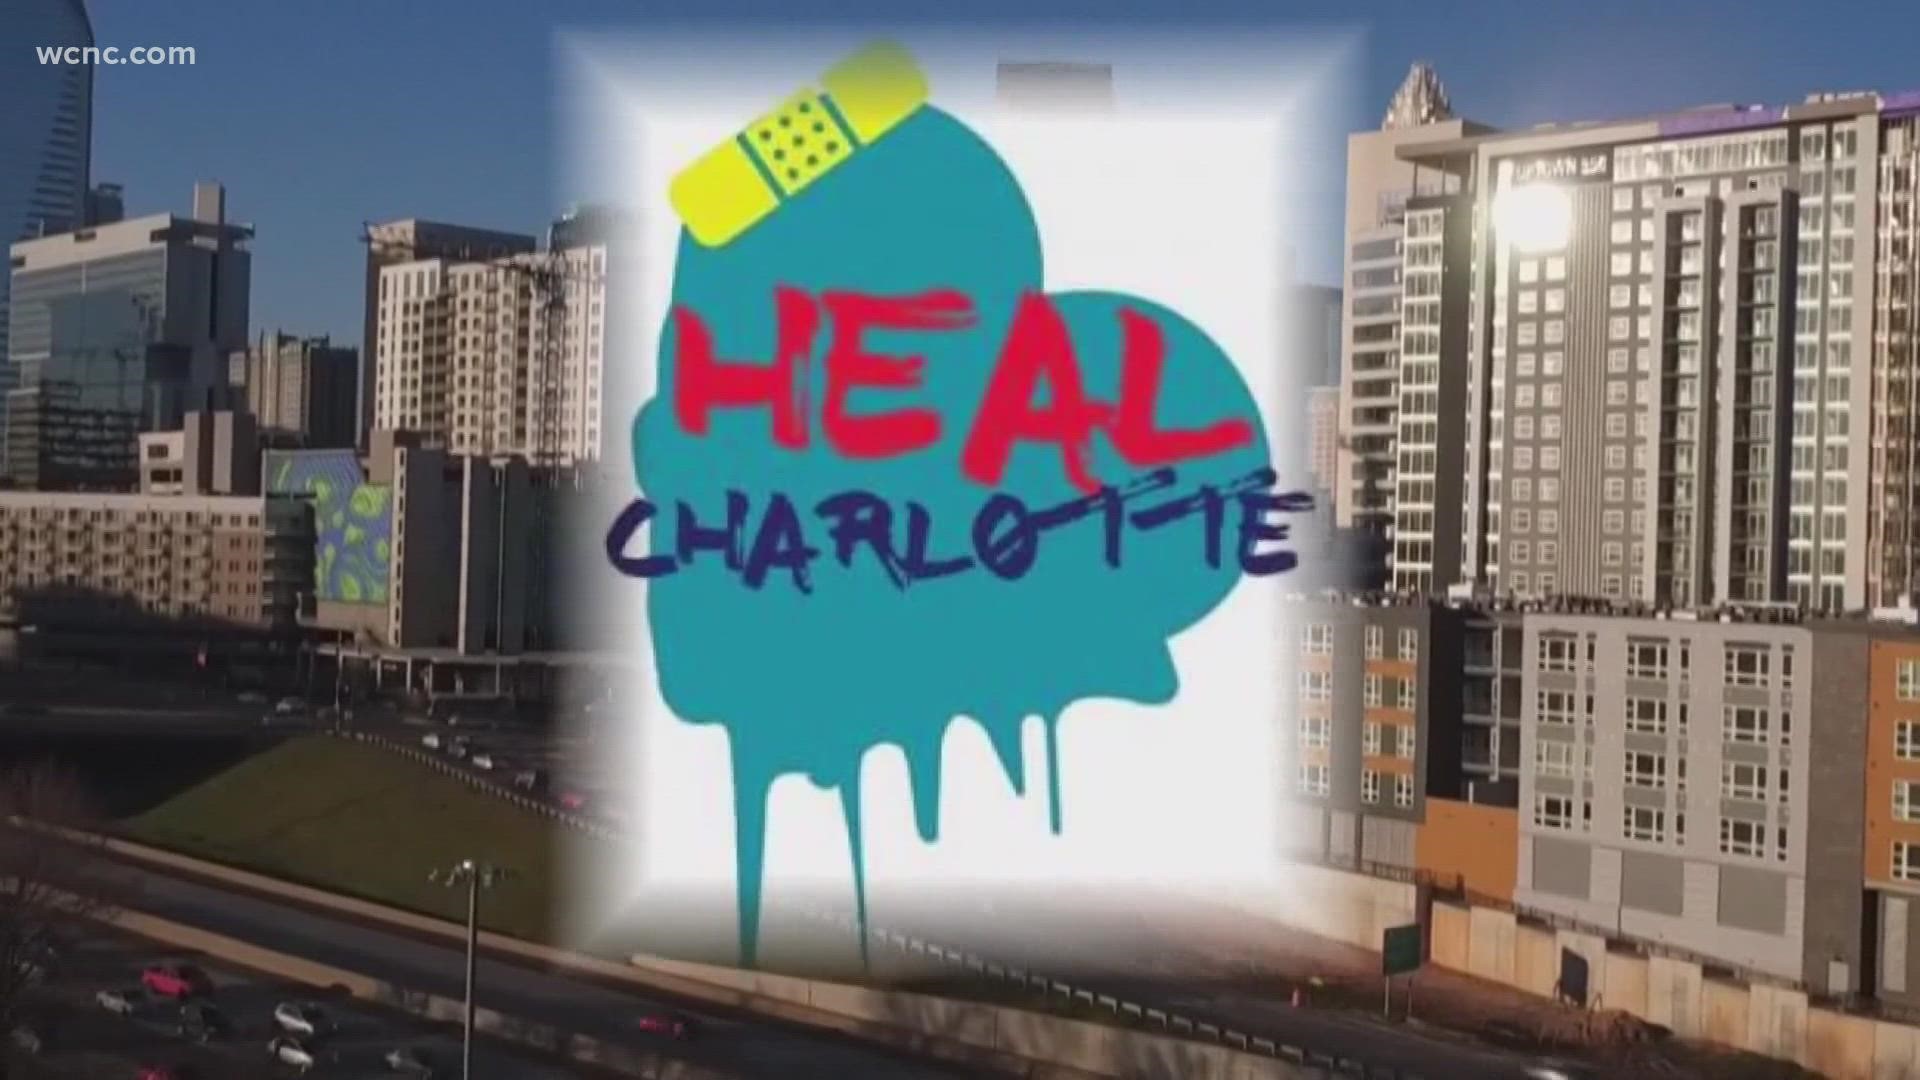 Heal Charlotte was born out of the frustration from a string of deadly police encounters in Charlotte.